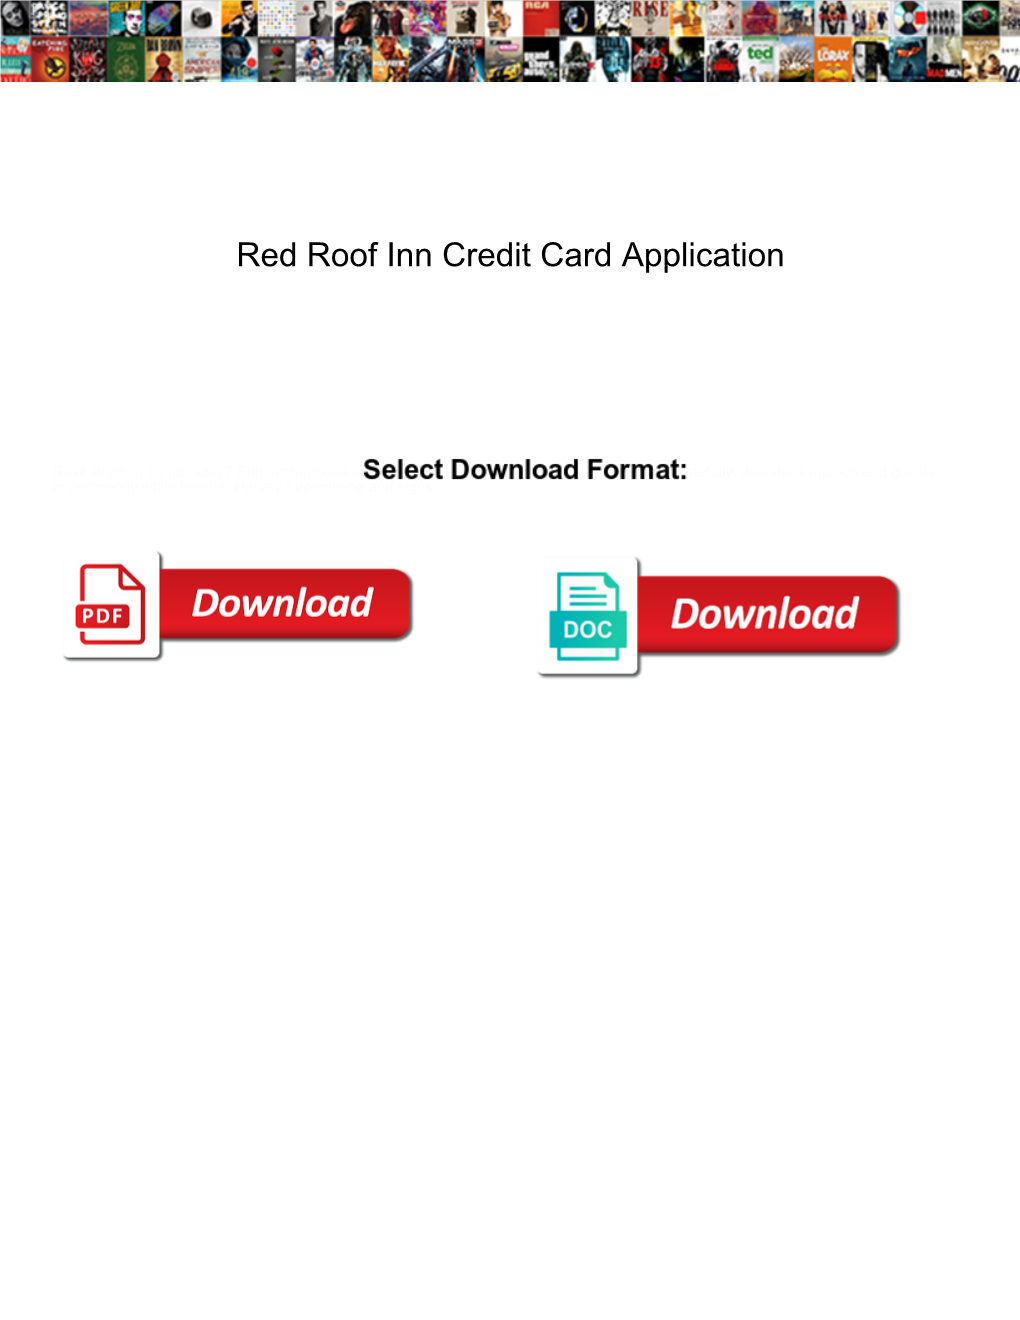 Red Roof Inn Credit Card Application